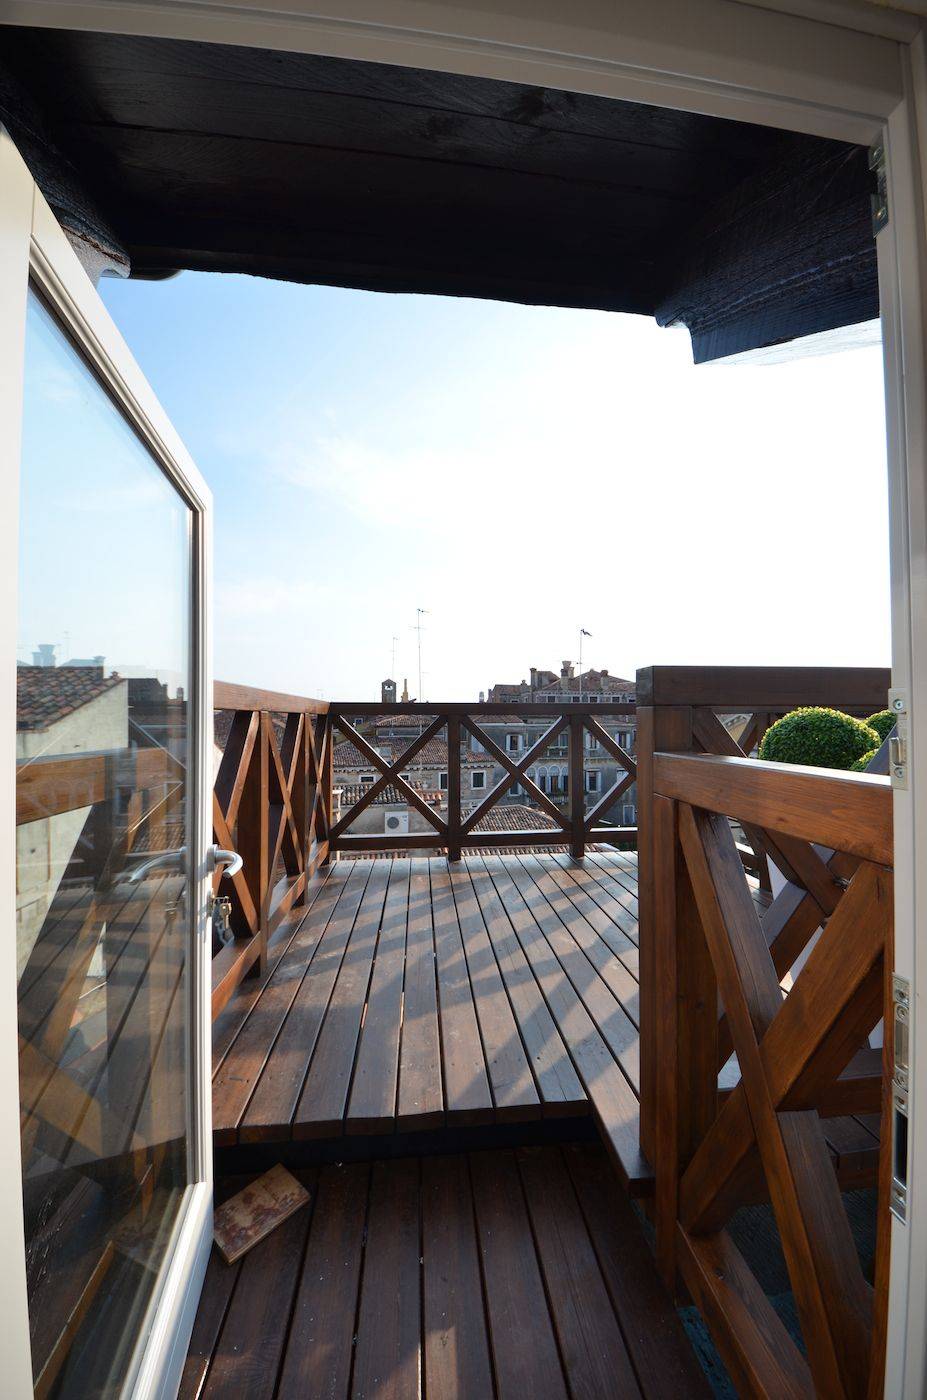 easy access to the panoramic Altana or roof-top terrace